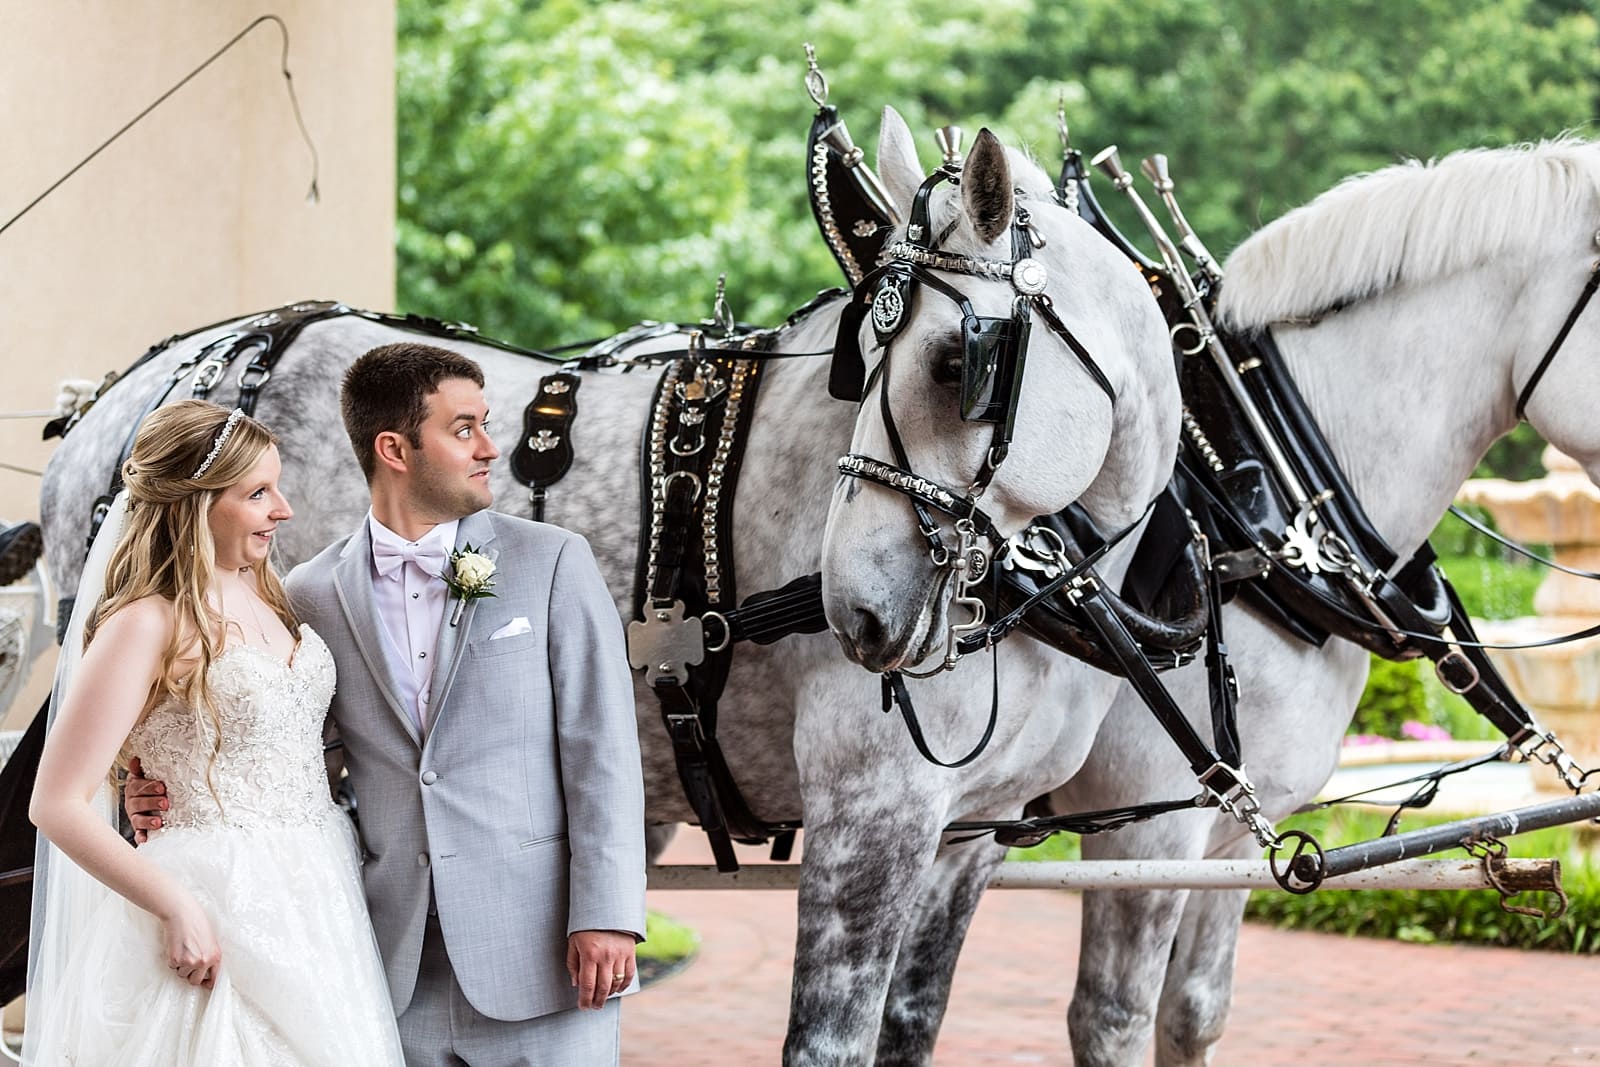 Fairytale wedding, bride and groom portrait, horses, horse drawn carriage